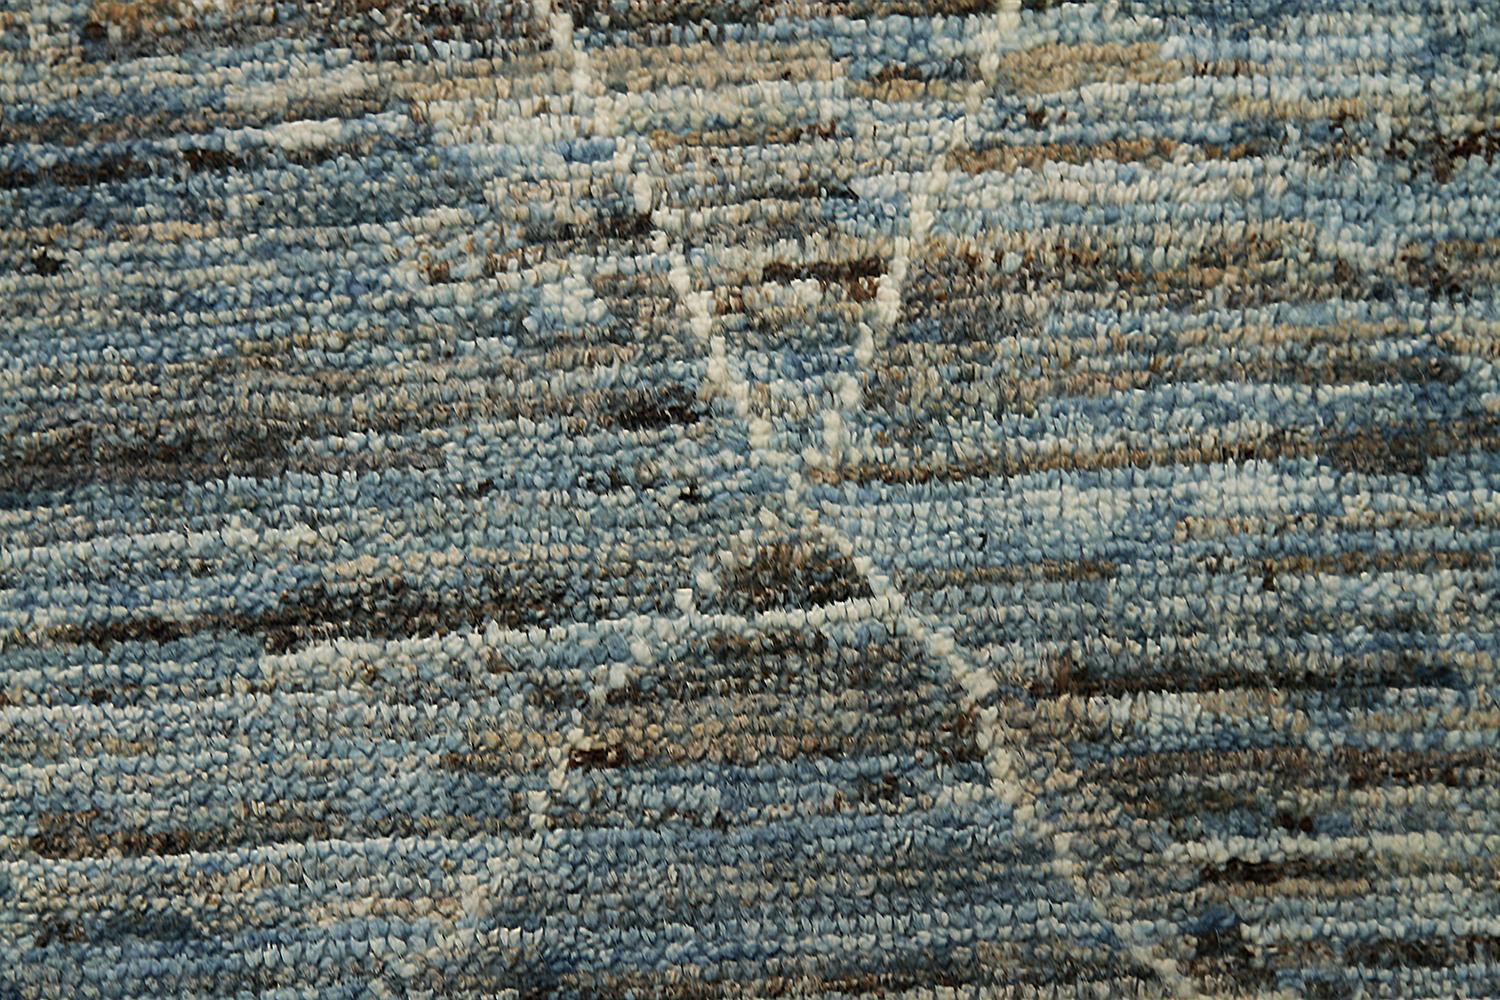 Beautiful Blue Berber Design Modern Moroccan Style Afghan Rug, Country of Origin: Afghanistan, Circa Date: Modern - Size: 9 ft 2 in x 11 ft 10 in (2.79 m x 3.61 m).